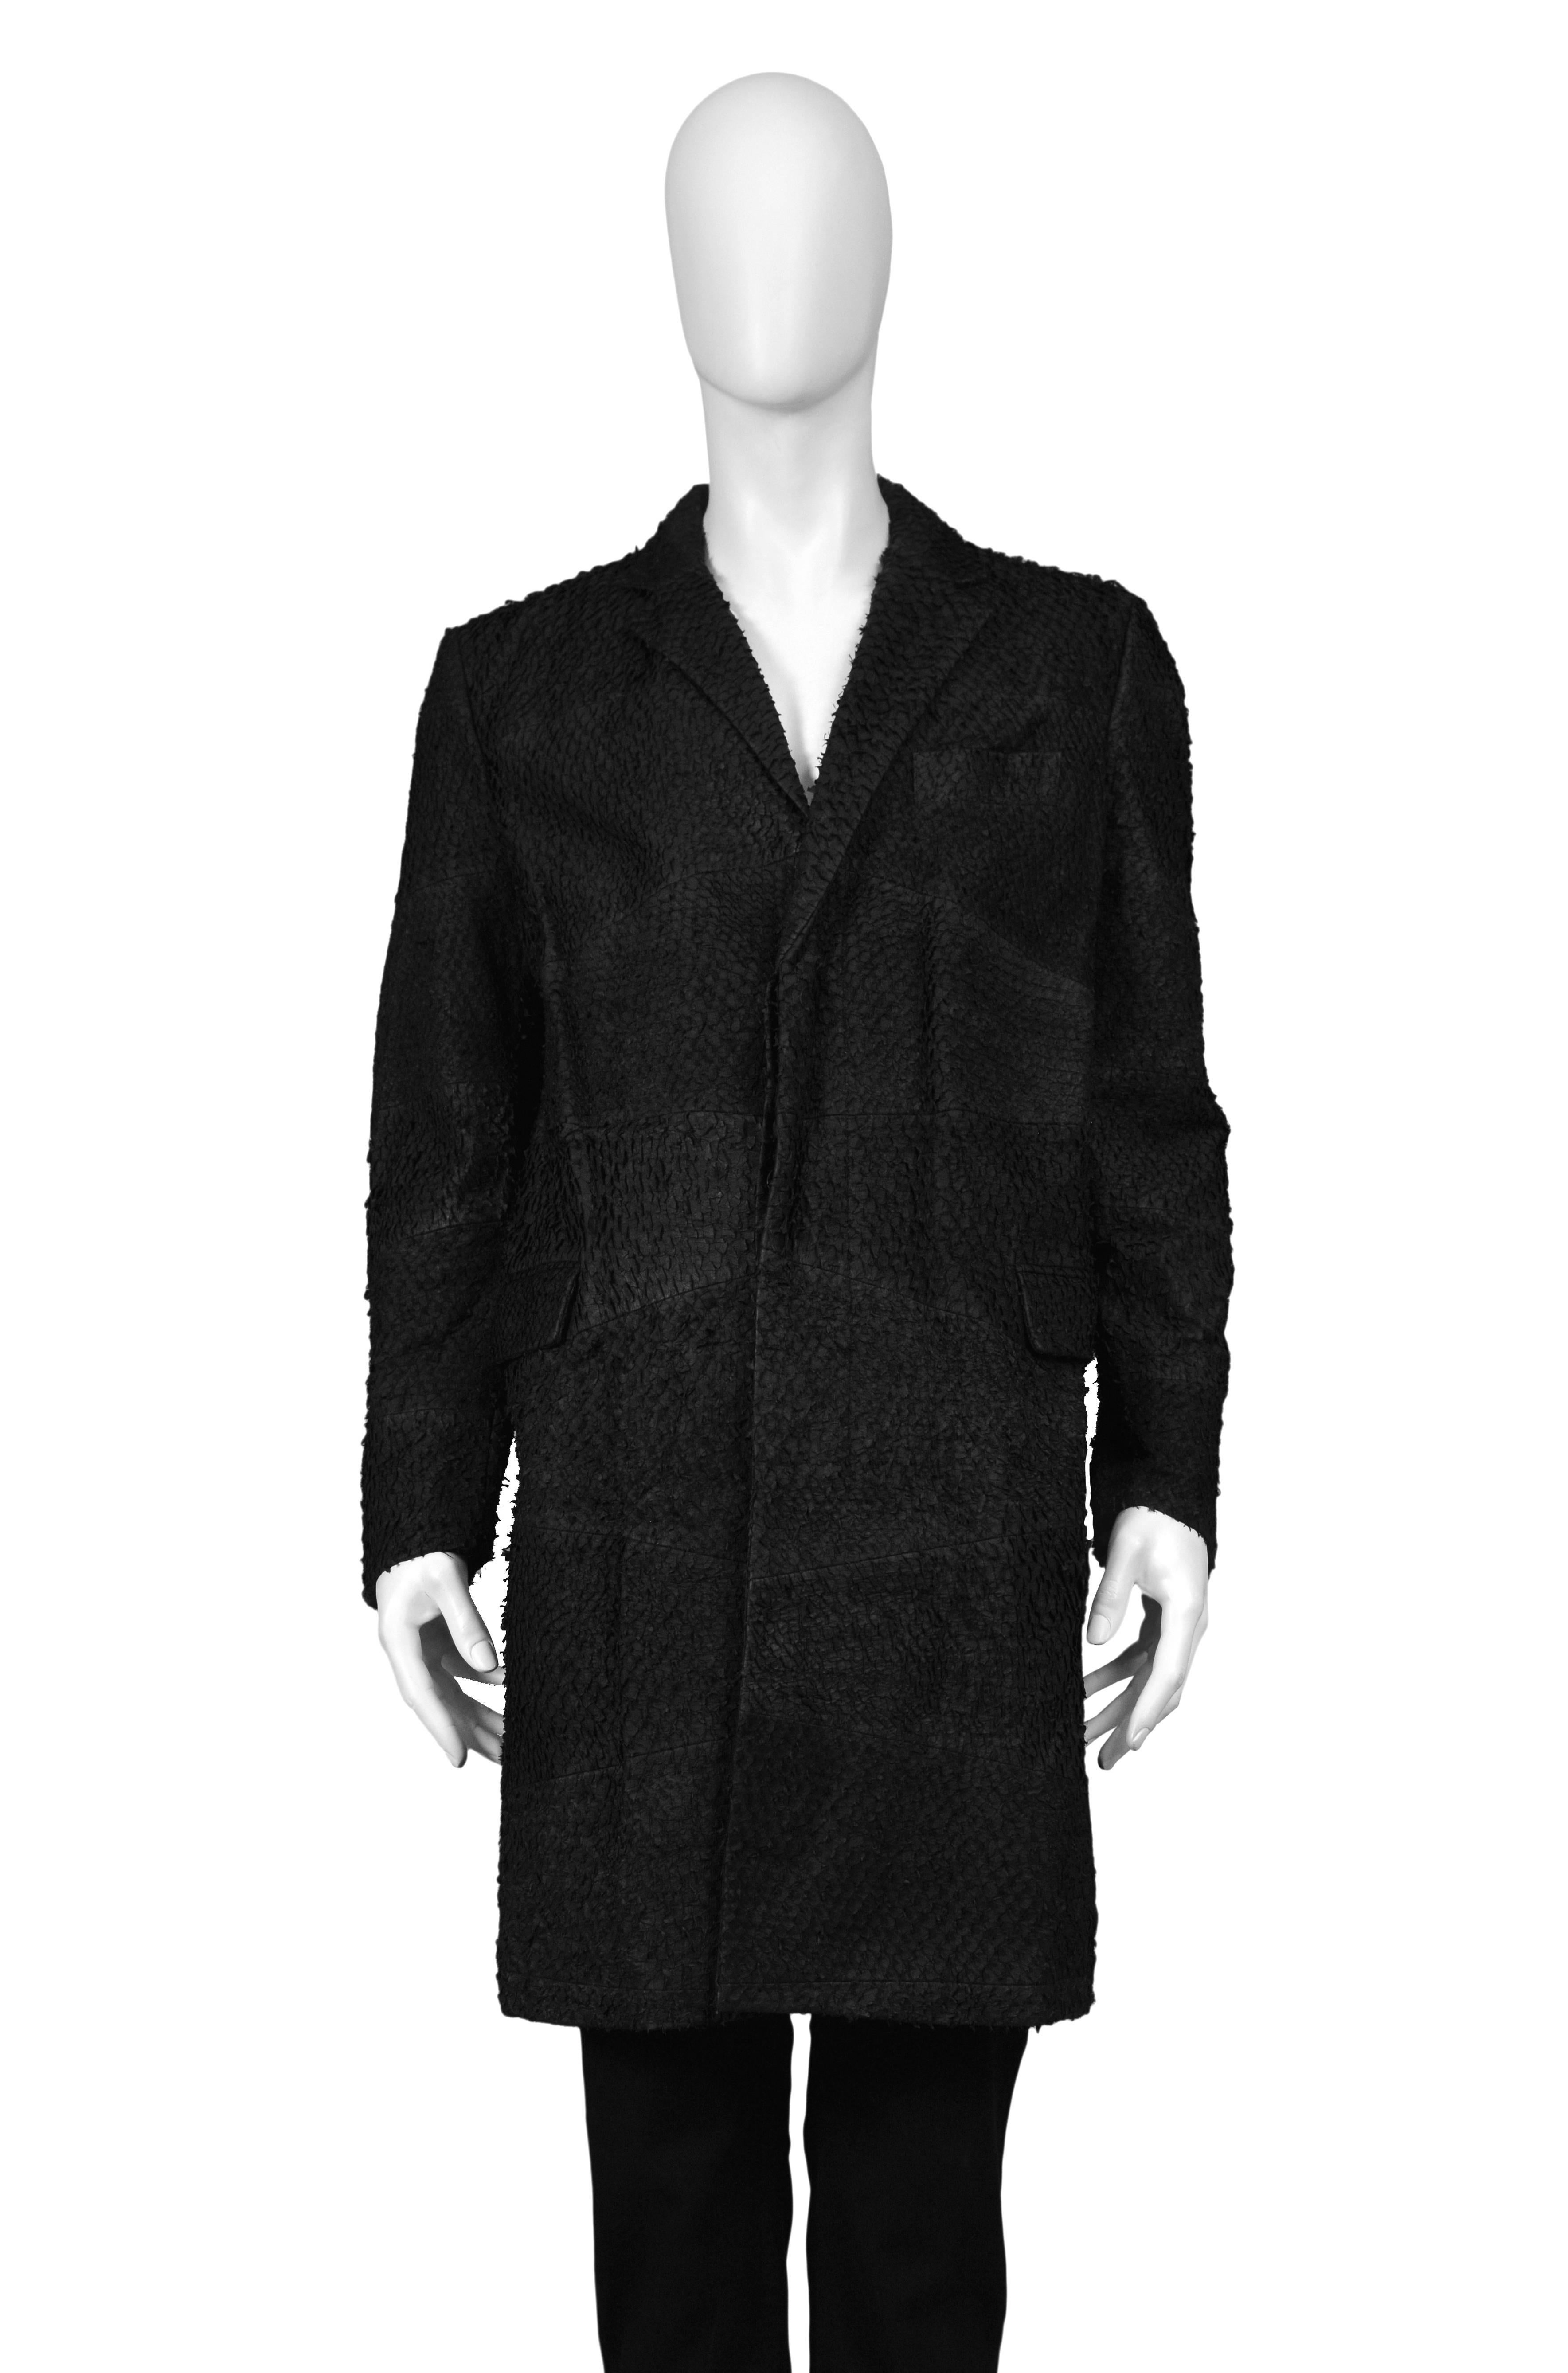 HELMUT LANG

BLACK PERCH LEATHER CLASSIC COAT
Condition : Excellent Vintage Condition
Helmut Lang black leather over coat with rough texture finish.

Press sample. Never worn. Comes with press sticker and original tag.
Size 50
ARTIFACTS: Helmut Lang